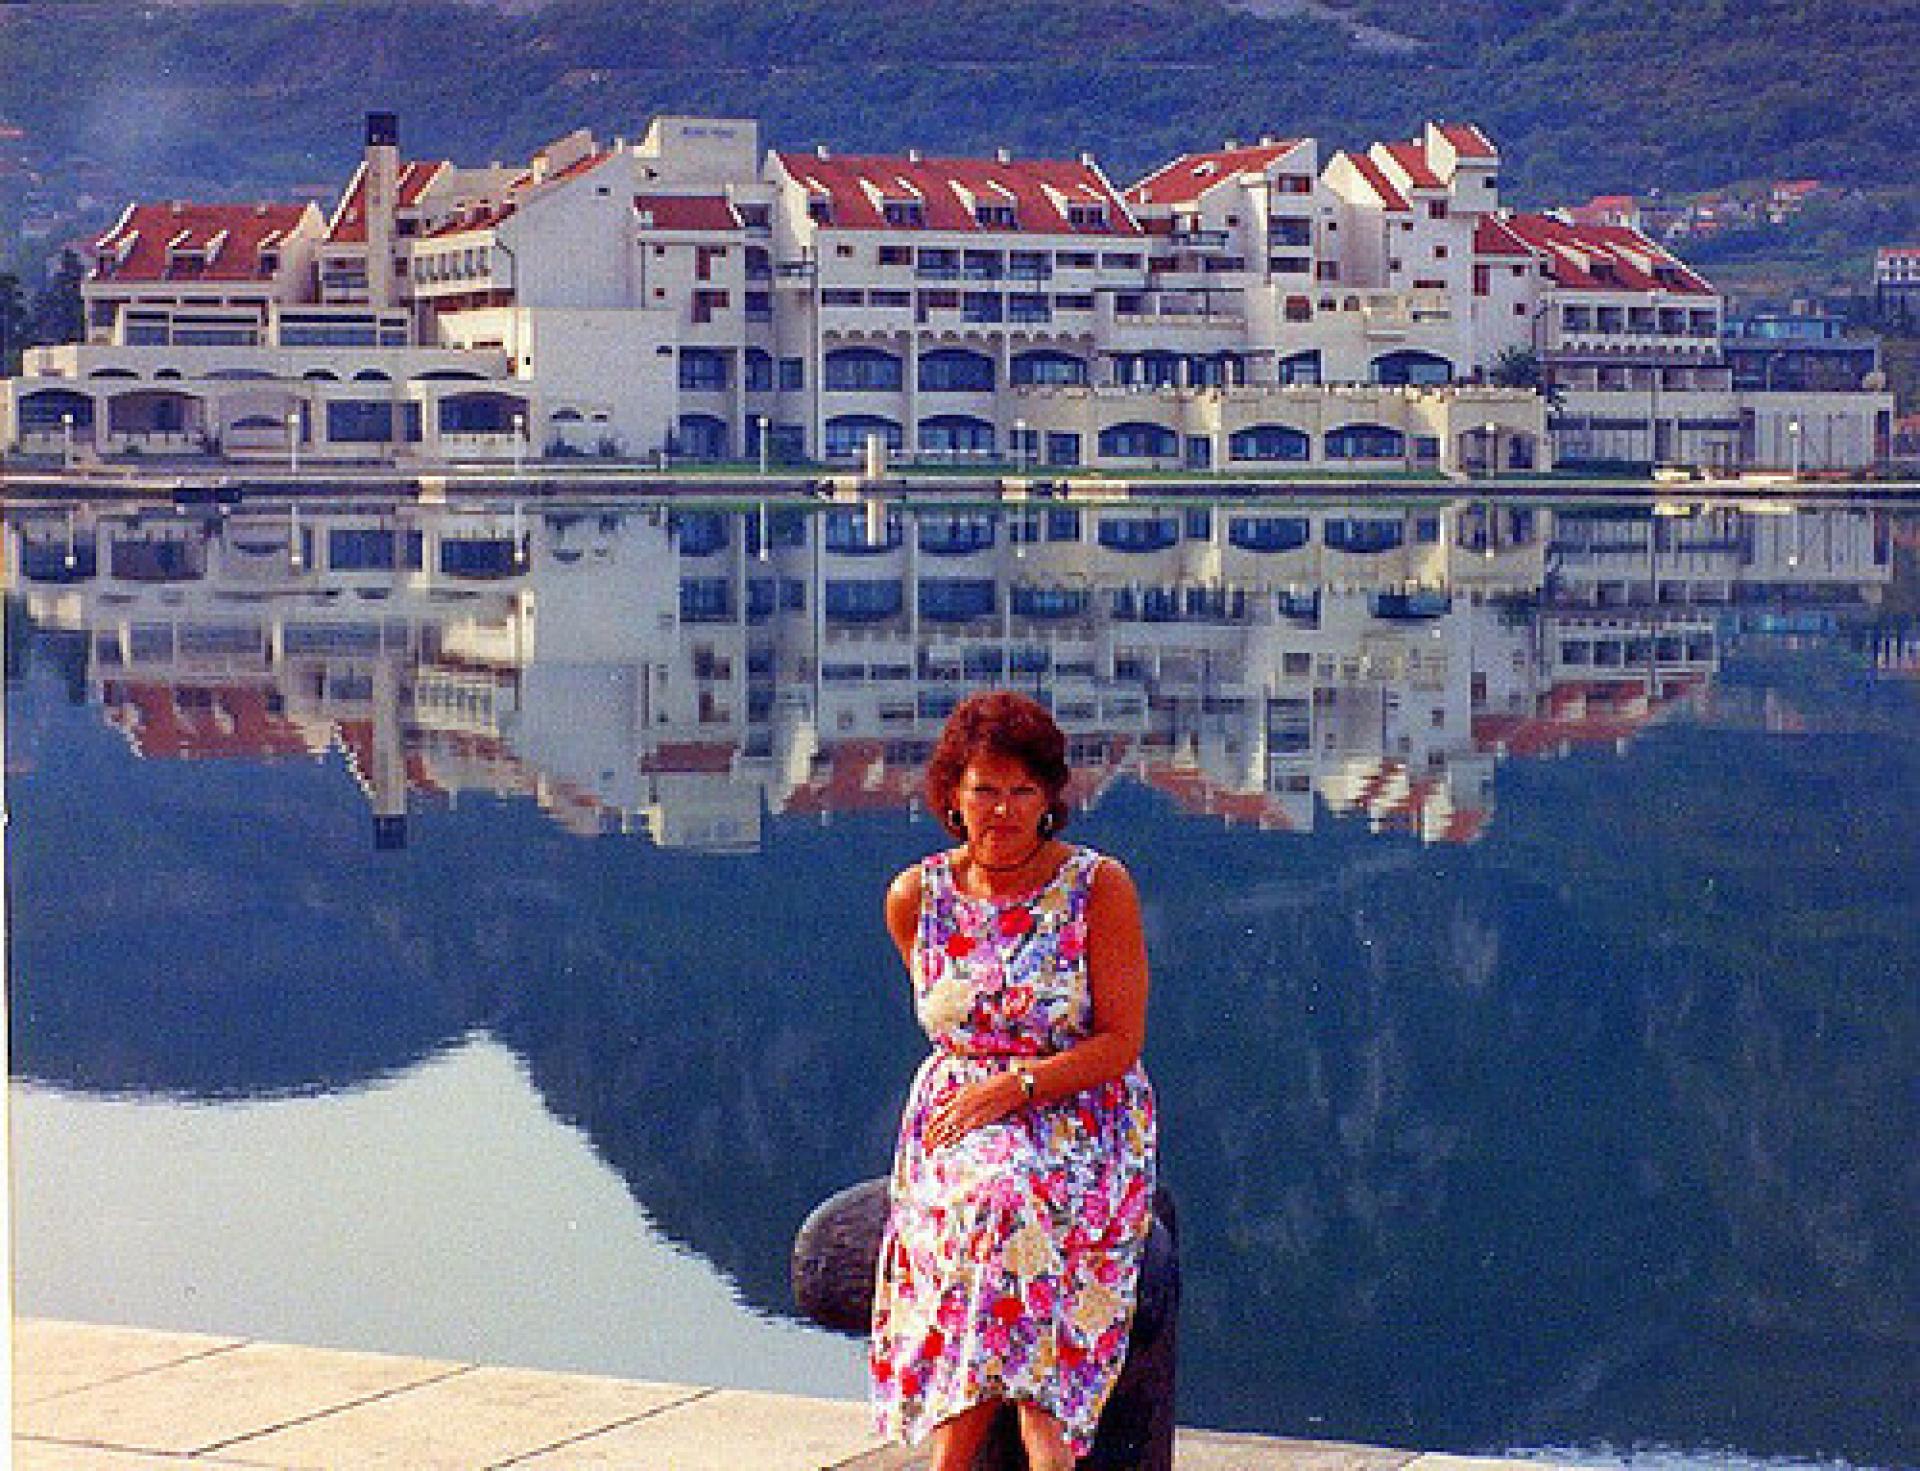 Hotel Fjord in Kotor has been out of use for more then ten years, and there are currently no plans for its redevelopment. | via Montenegro Pavilion